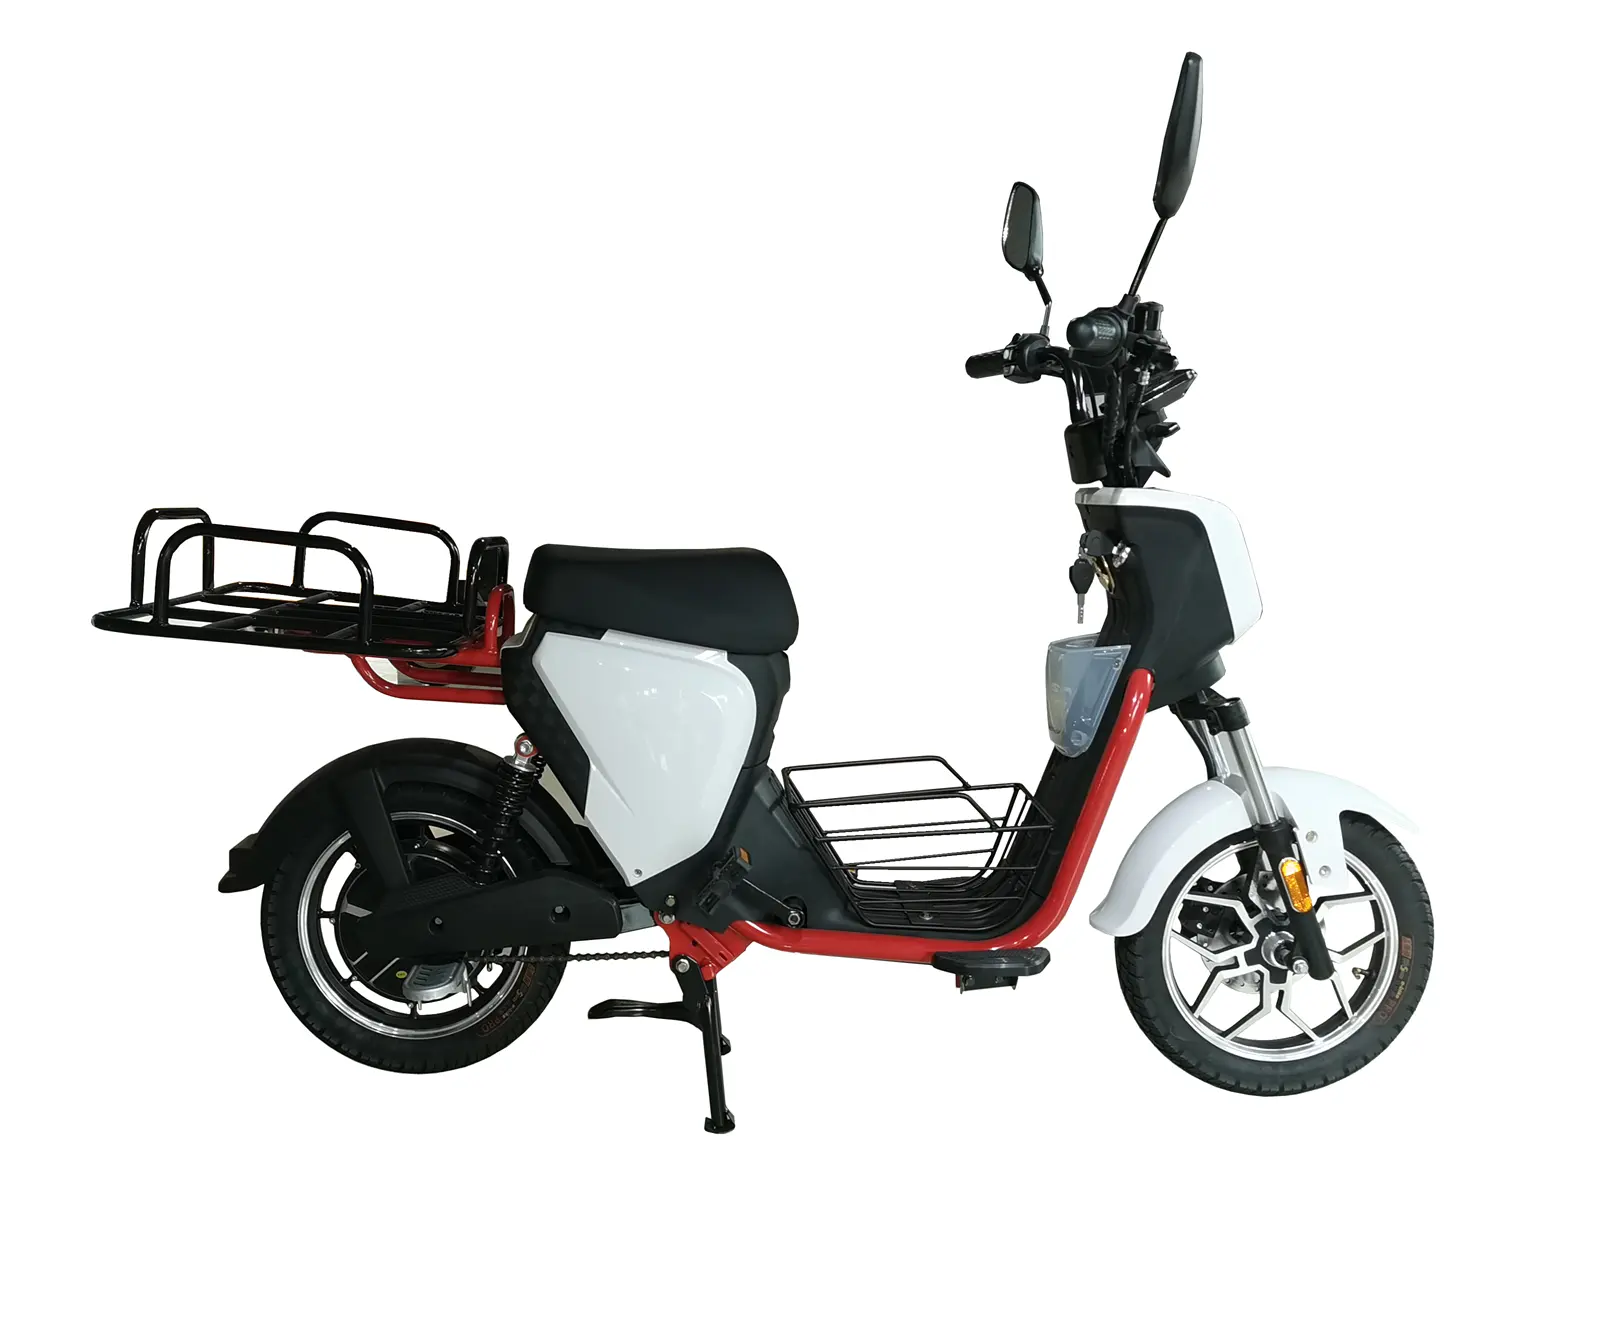 China High Speed Cheap Adult Electric Motorcycle 1000W for Sale 48v 12ah electric motorcycle